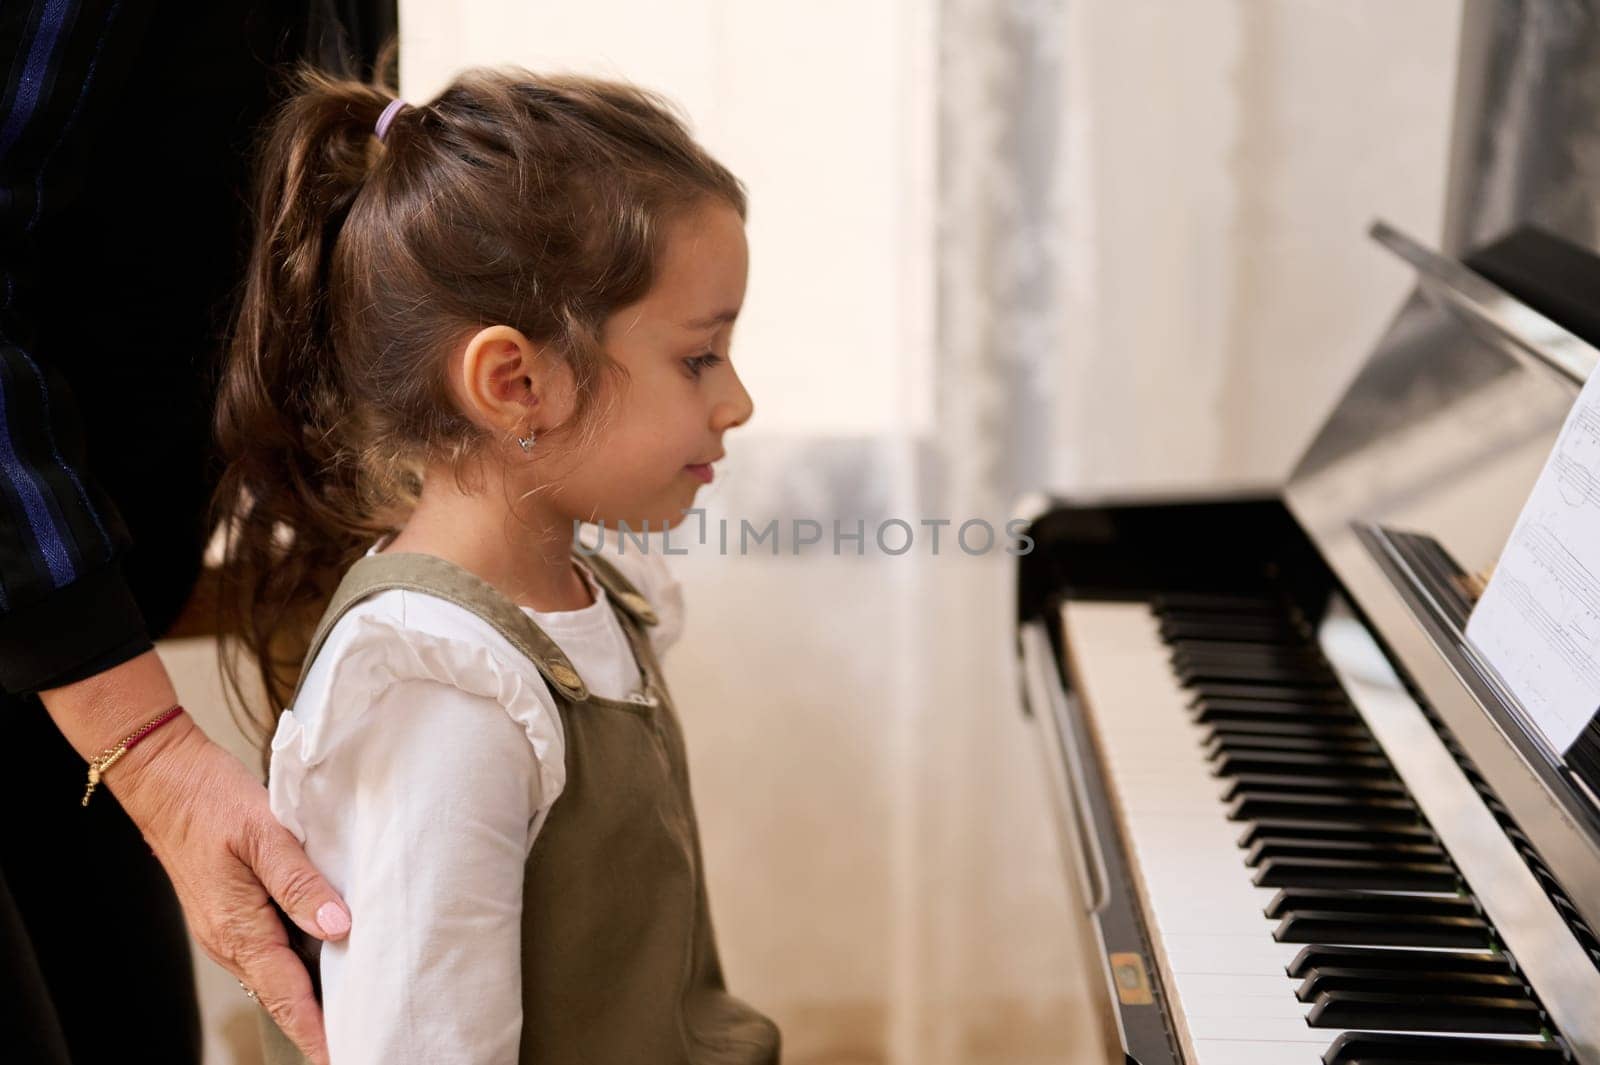 Little girl having individual piano lesson, sitting at pianoforte, ready to learn music with her piano teacher. Authentic portrait of a cute child girl pianist, little talented musician